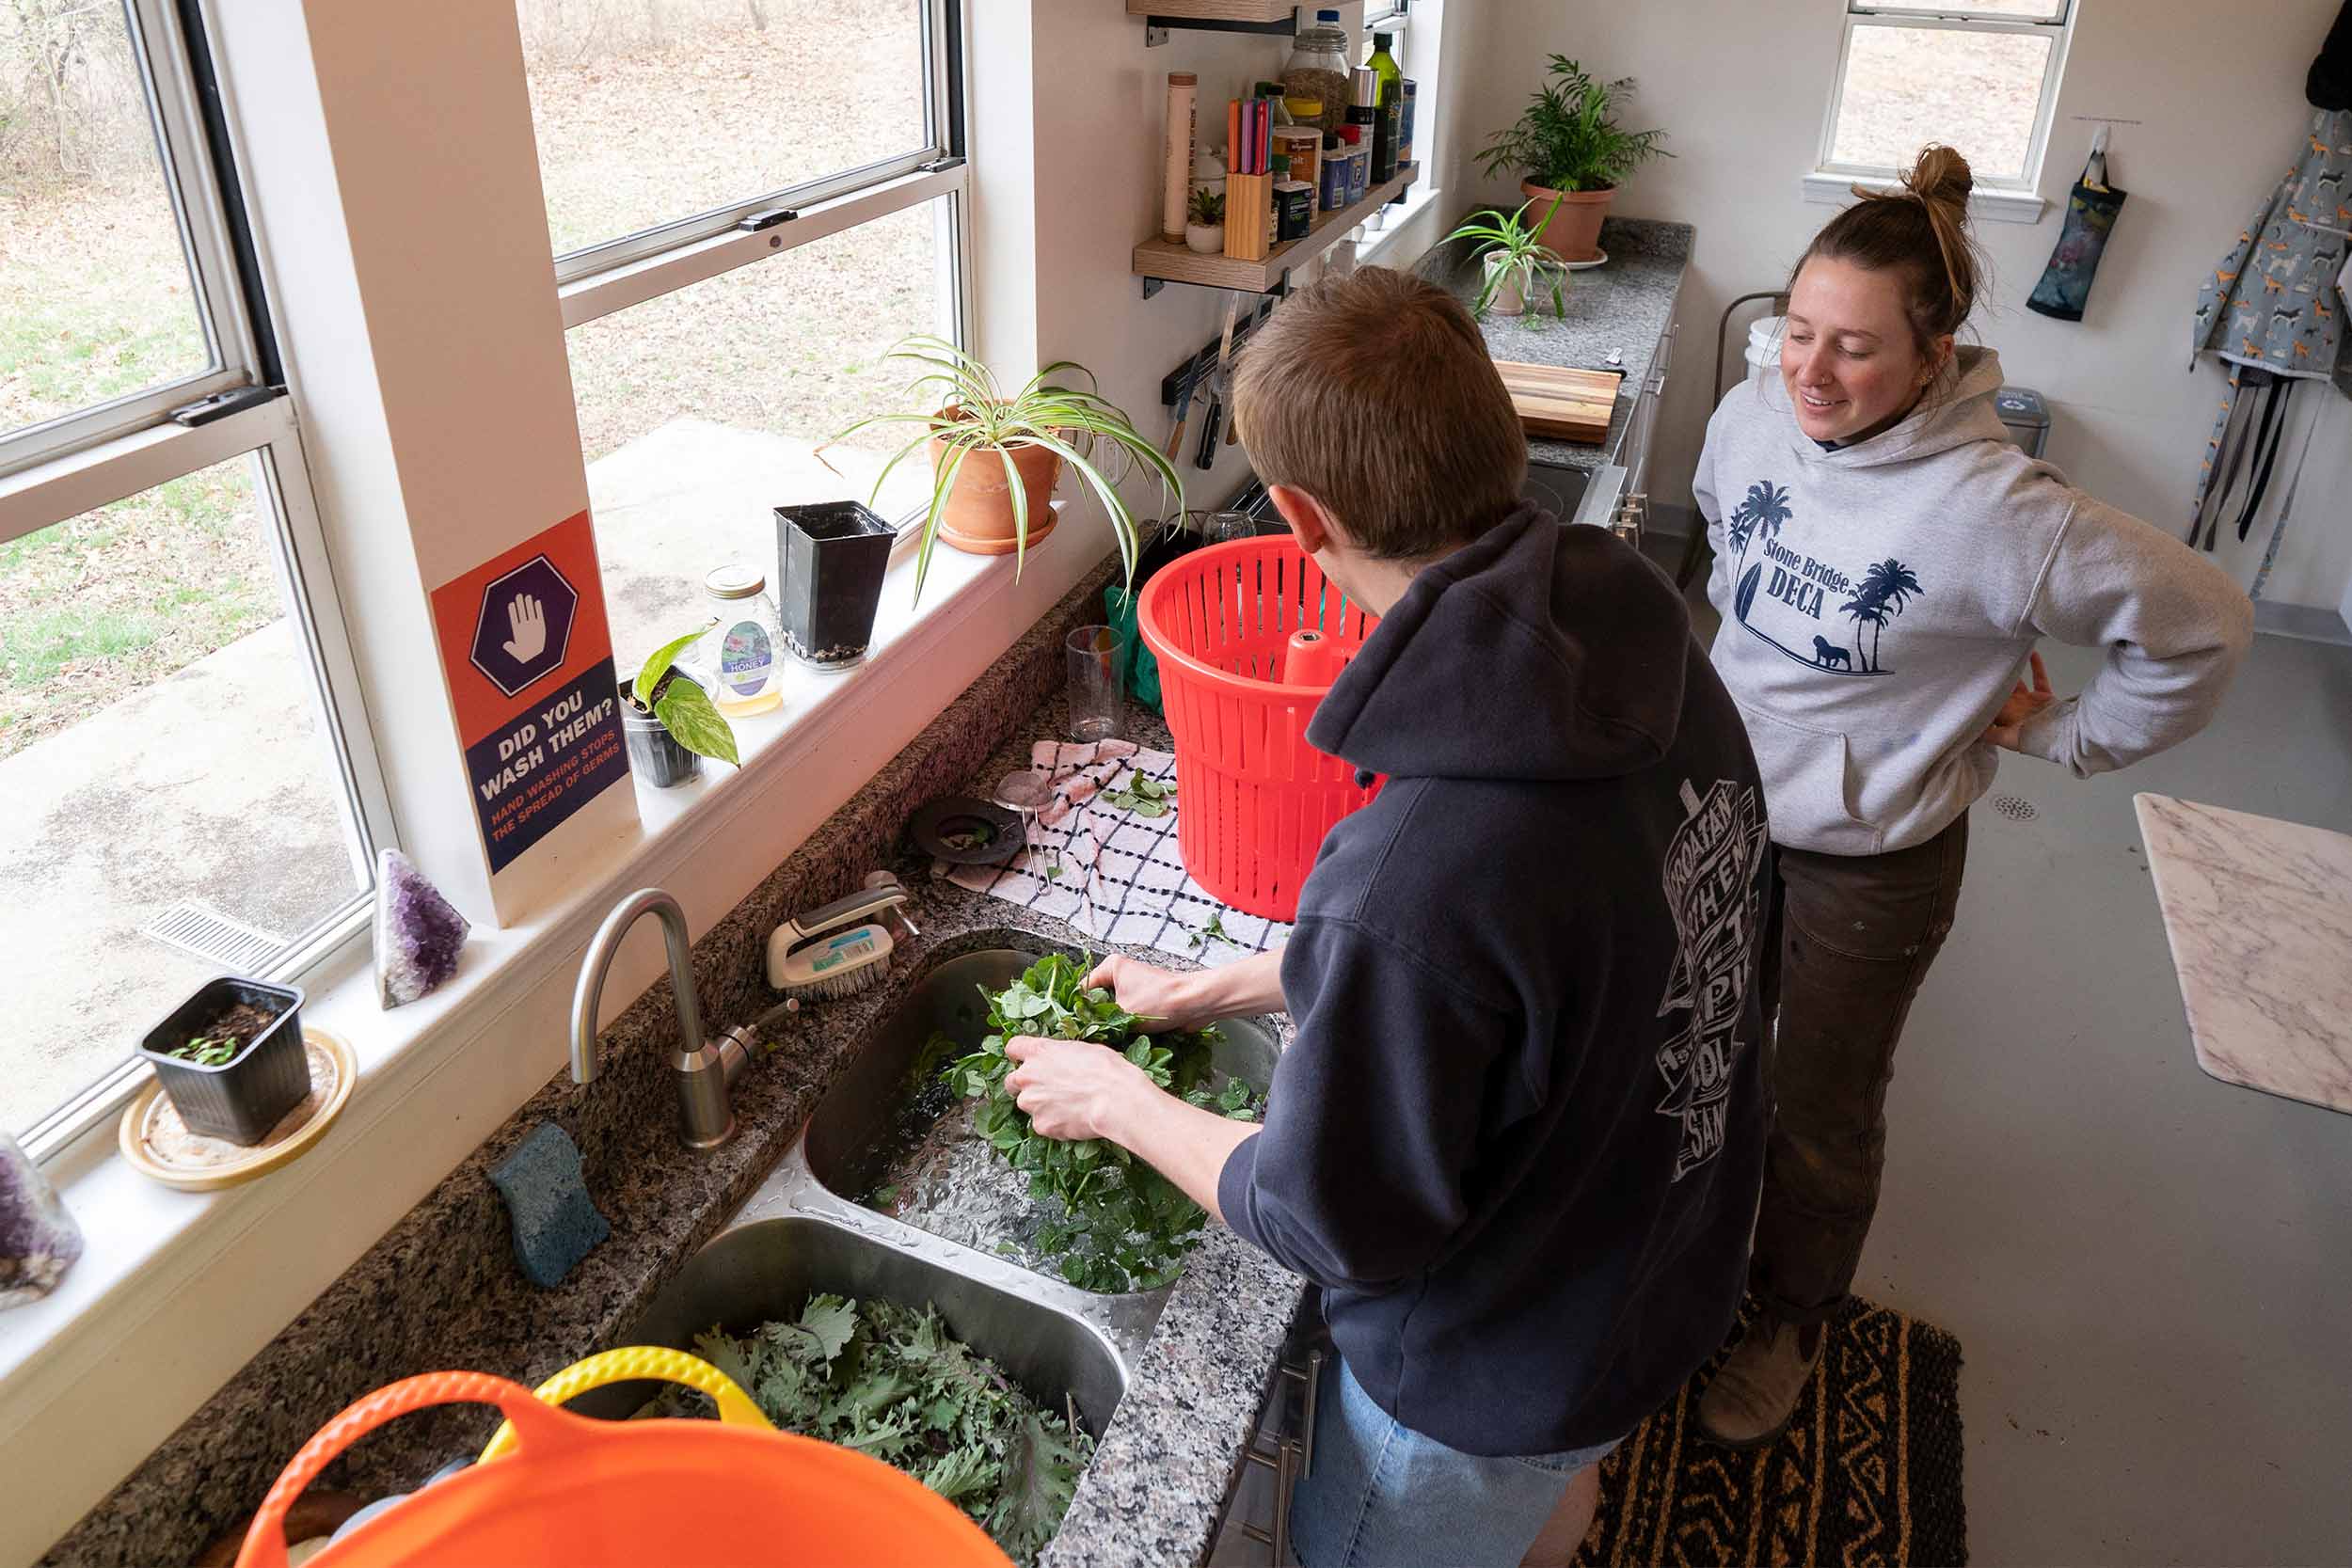 John Luecke, left, and Jayna Mallon, right, in a kitchen washing vegetables